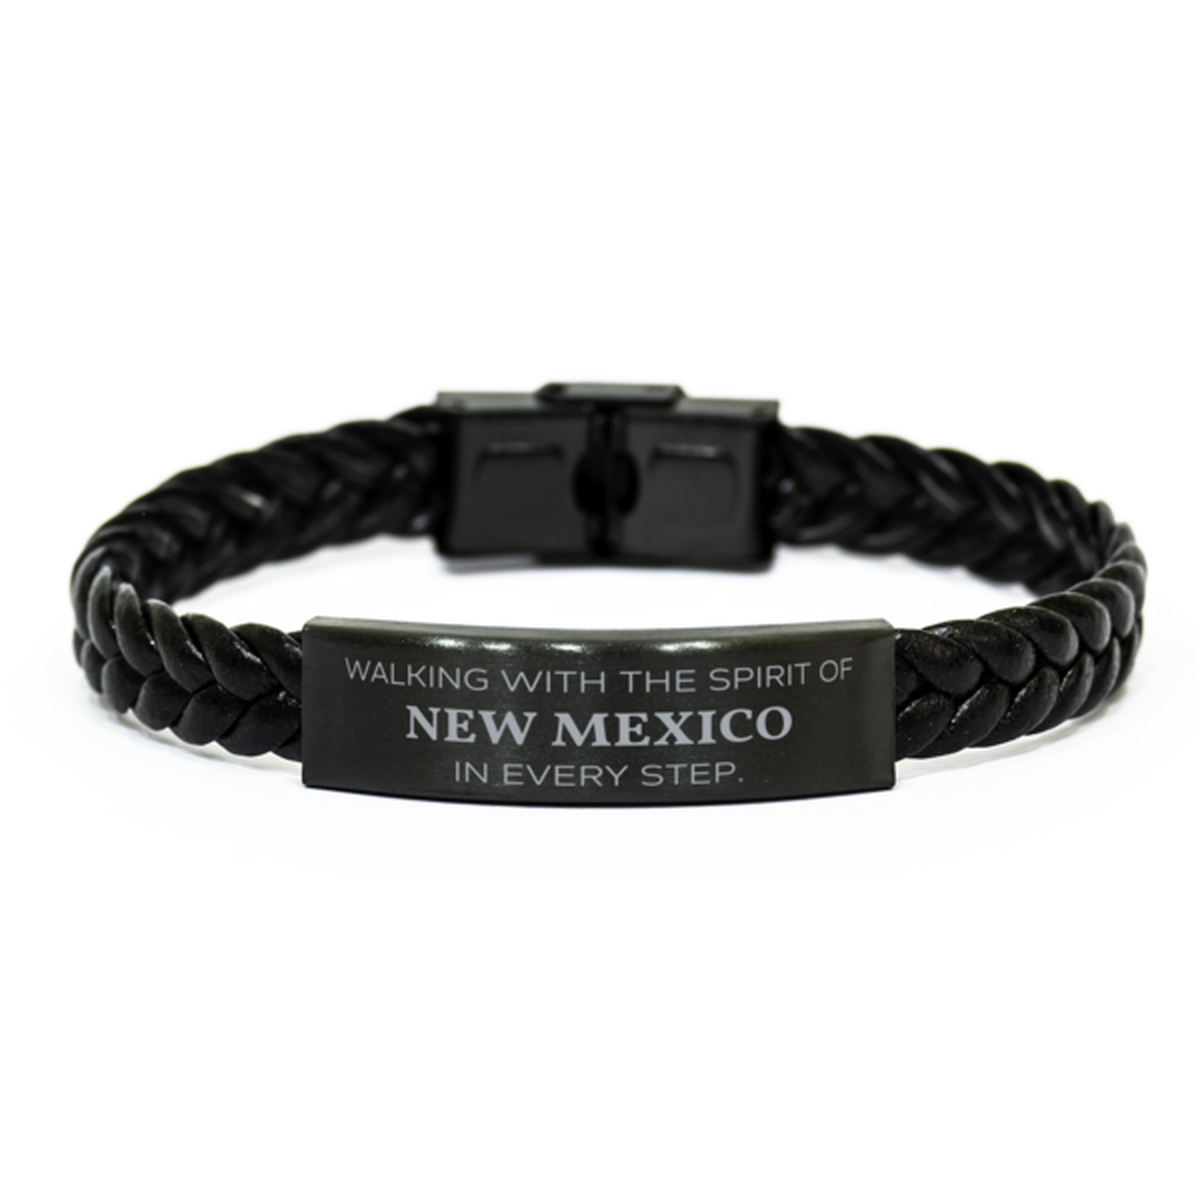 New Mexico Gifts, Walking with the spirit, Love New Mexico Birthday Christmas Braided Leather Bracelet For New Mexico People, Men, Women, Friends